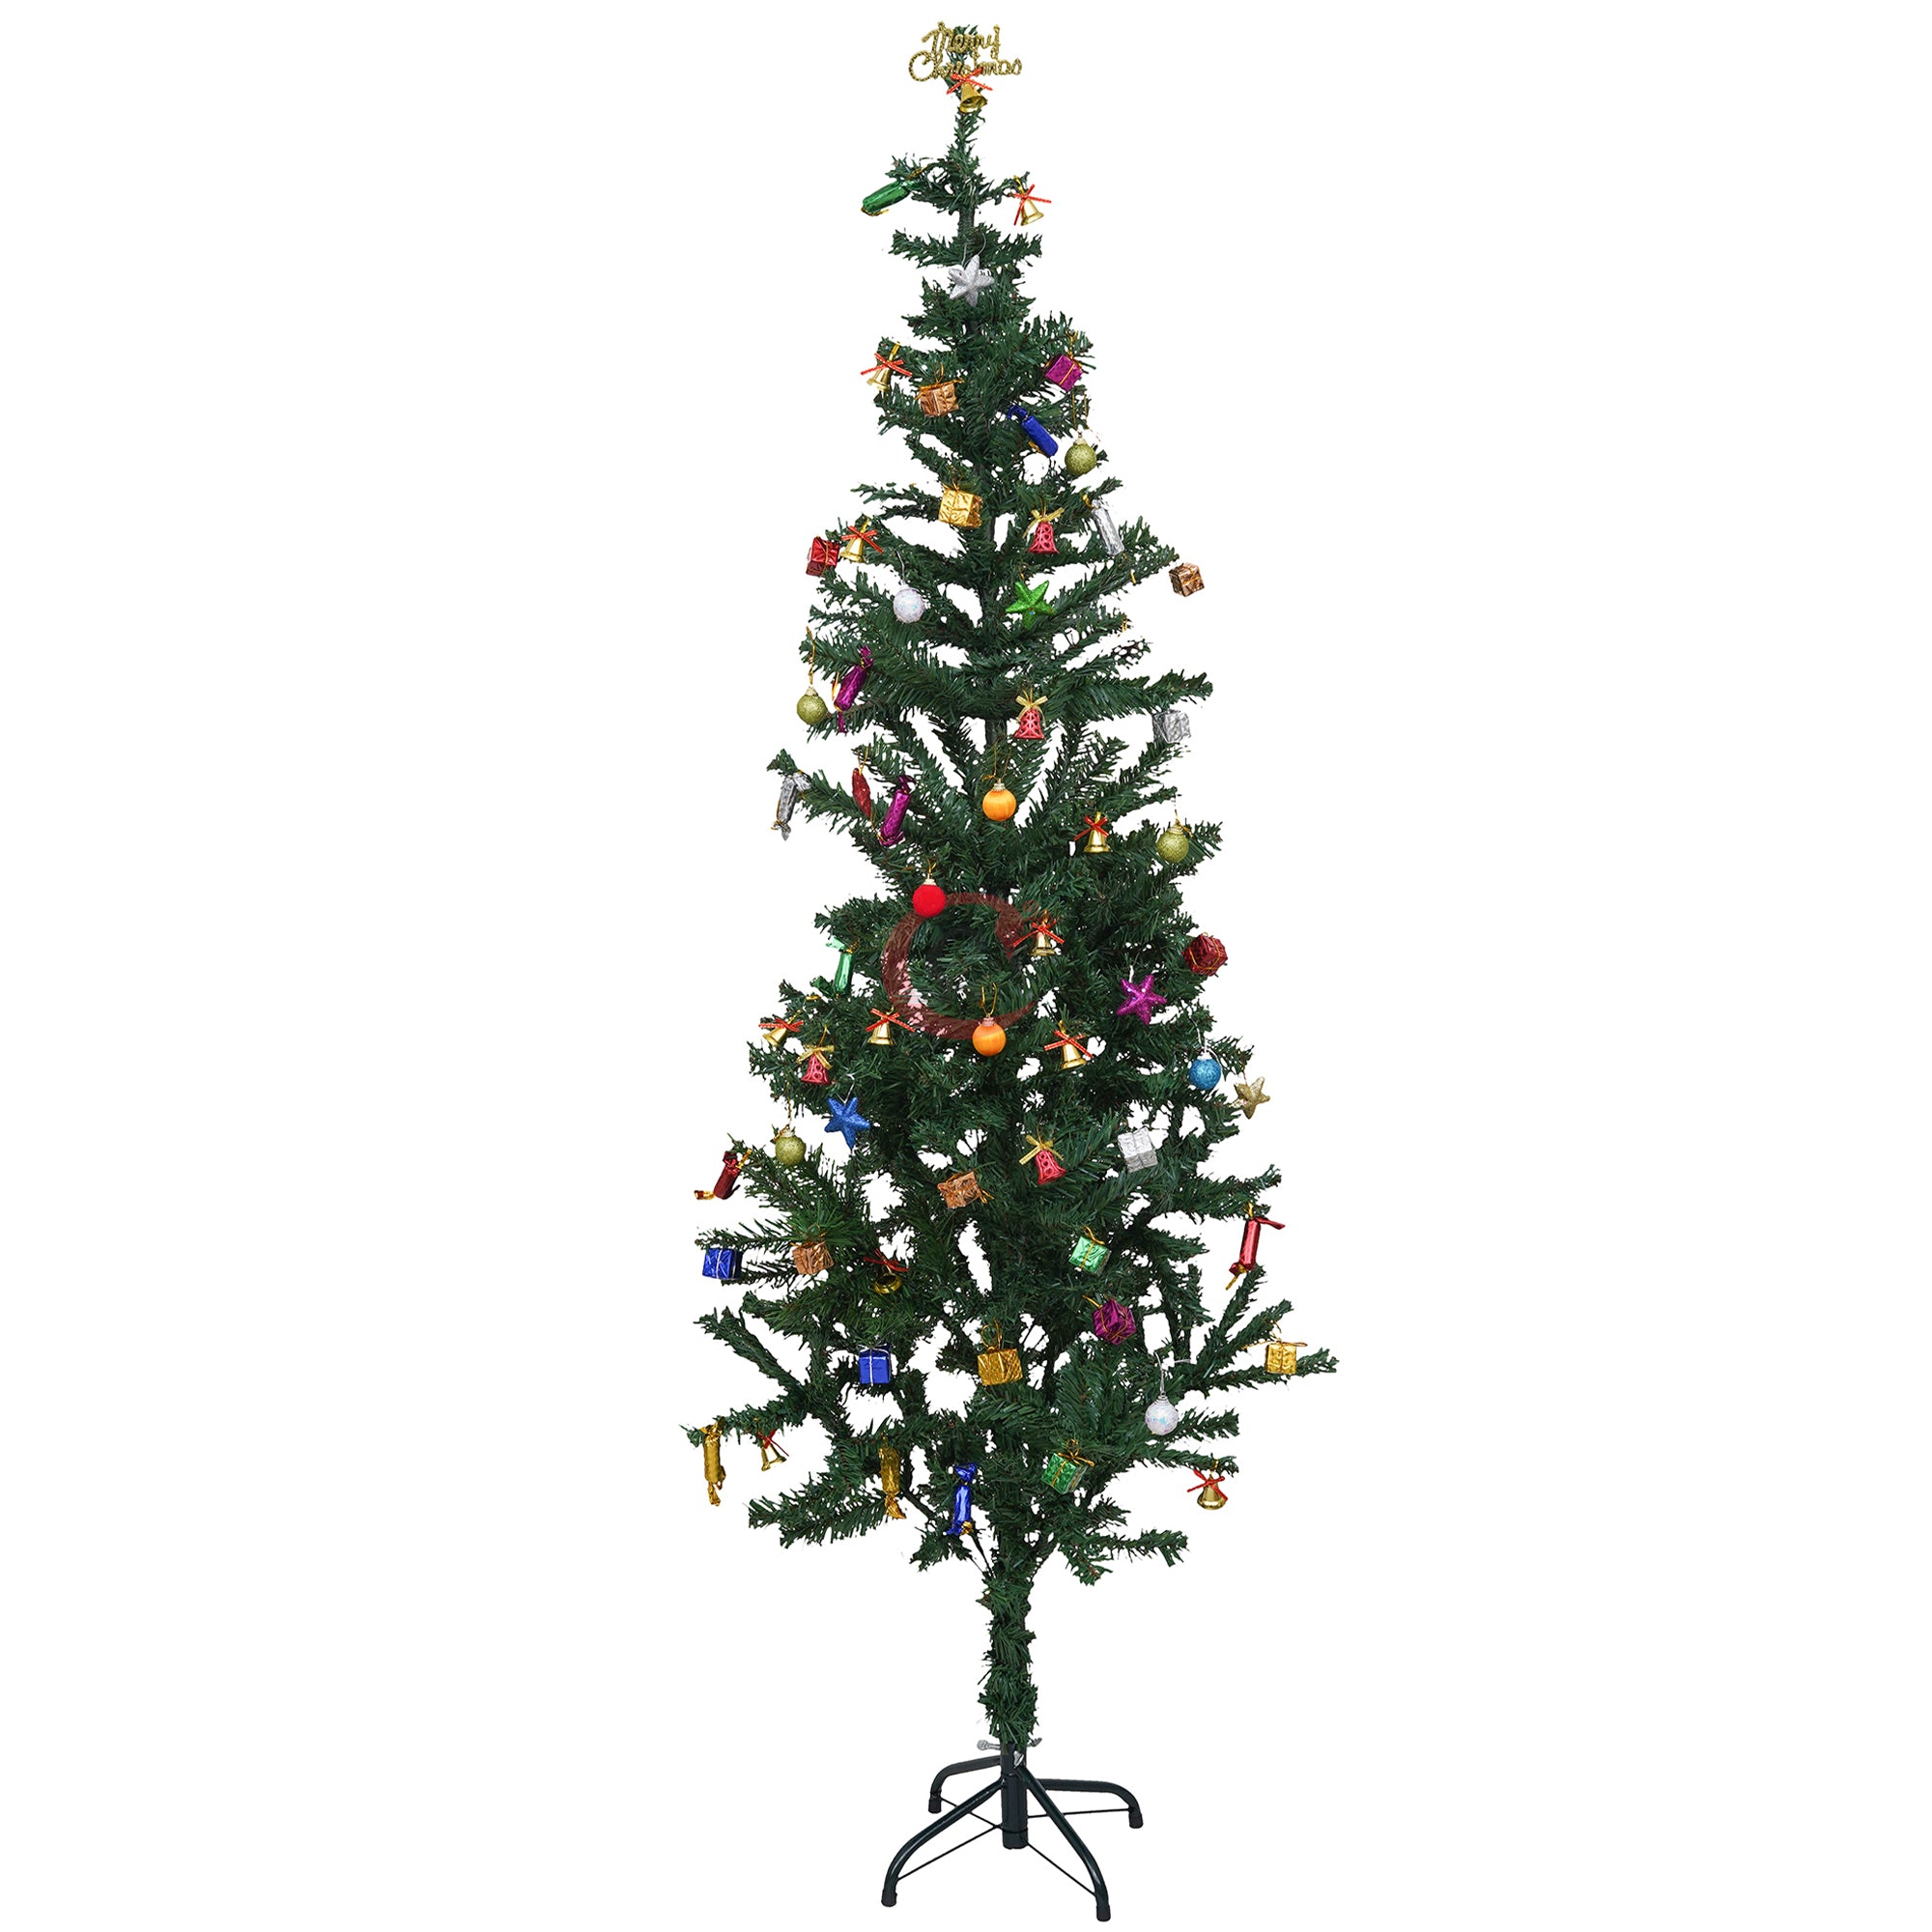 eCraftIndia 6 Feet Green Artificial Christmas Tree Xmas Pine Tree with Metal Stand - Xmas Tree for Indoor, Outdoor, Home, Living Room, Office, Church Decor - Merry Christmas Decoration Item 7